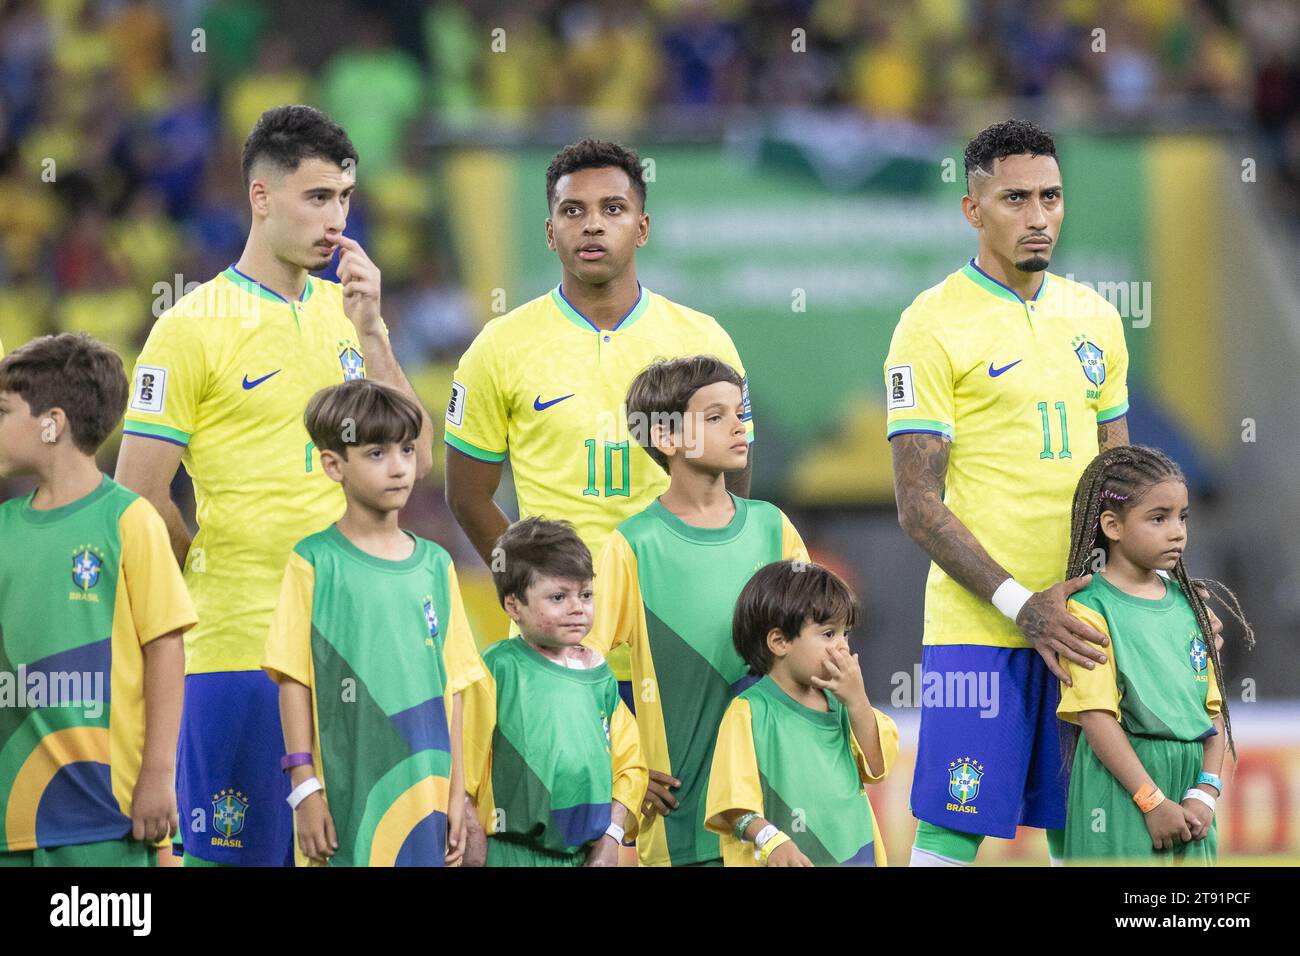 Rio De Janeiro, Brazil. 21st Nov, 2023. RIO DE JANEIRO, BRAZIL - NOVEMBER 21: Rodrygo of Brazil looks on before a match between Brazil and Argentina as part of 2026 FIFA World Cup South American Qualification at Maracana Stadium on November 21, 2023 in Rio de Janeiro, Brazil. (Photo by Wanderson Oliveira/PxImages/Sipa USA) Credit: Sipa USA/Alamy Live News Stock Photo